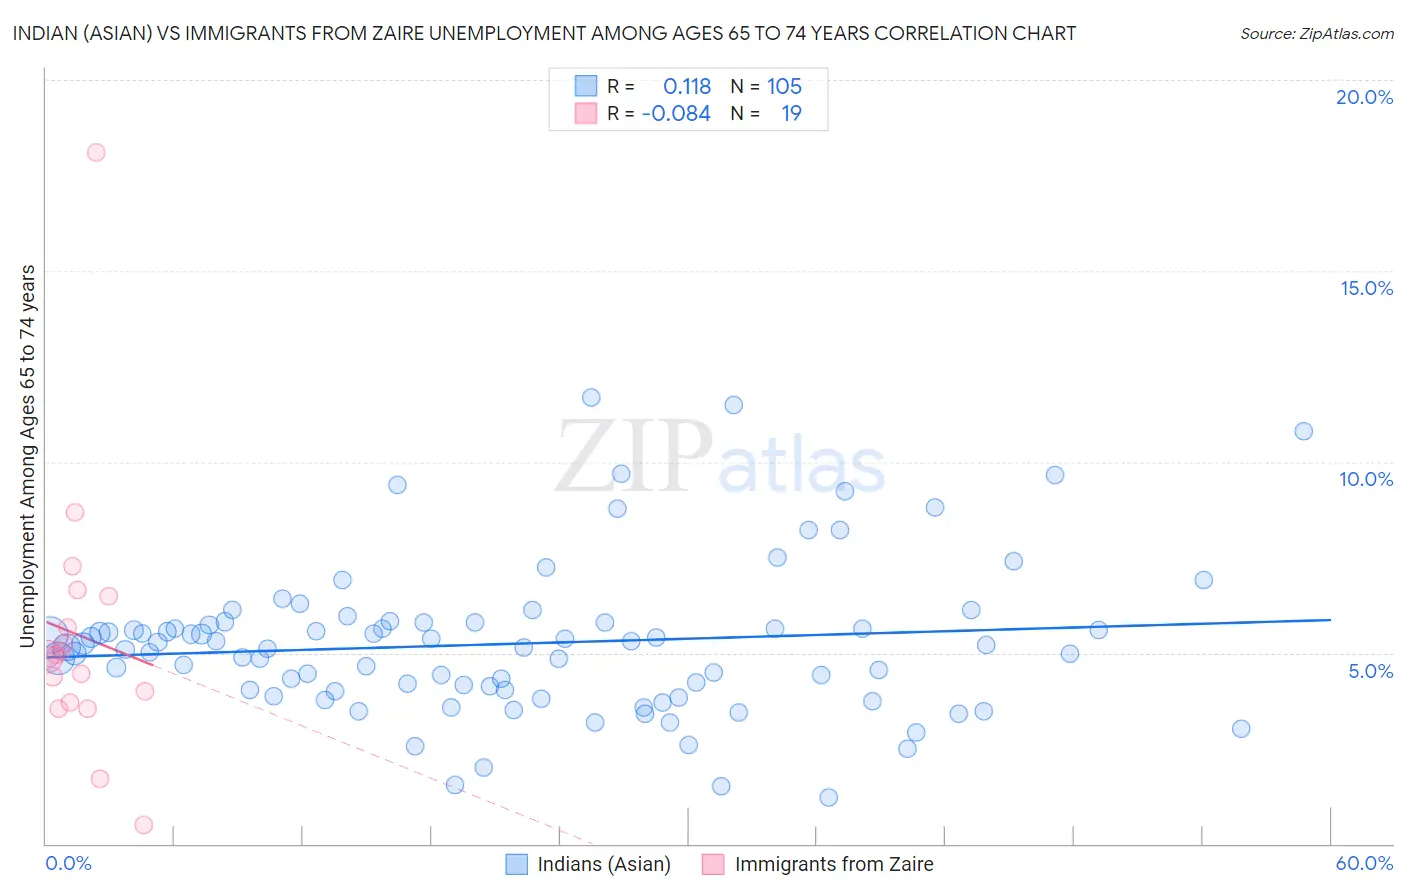 Indian (Asian) vs Immigrants from Zaire Unemployment Among Ages 65 to 74 years